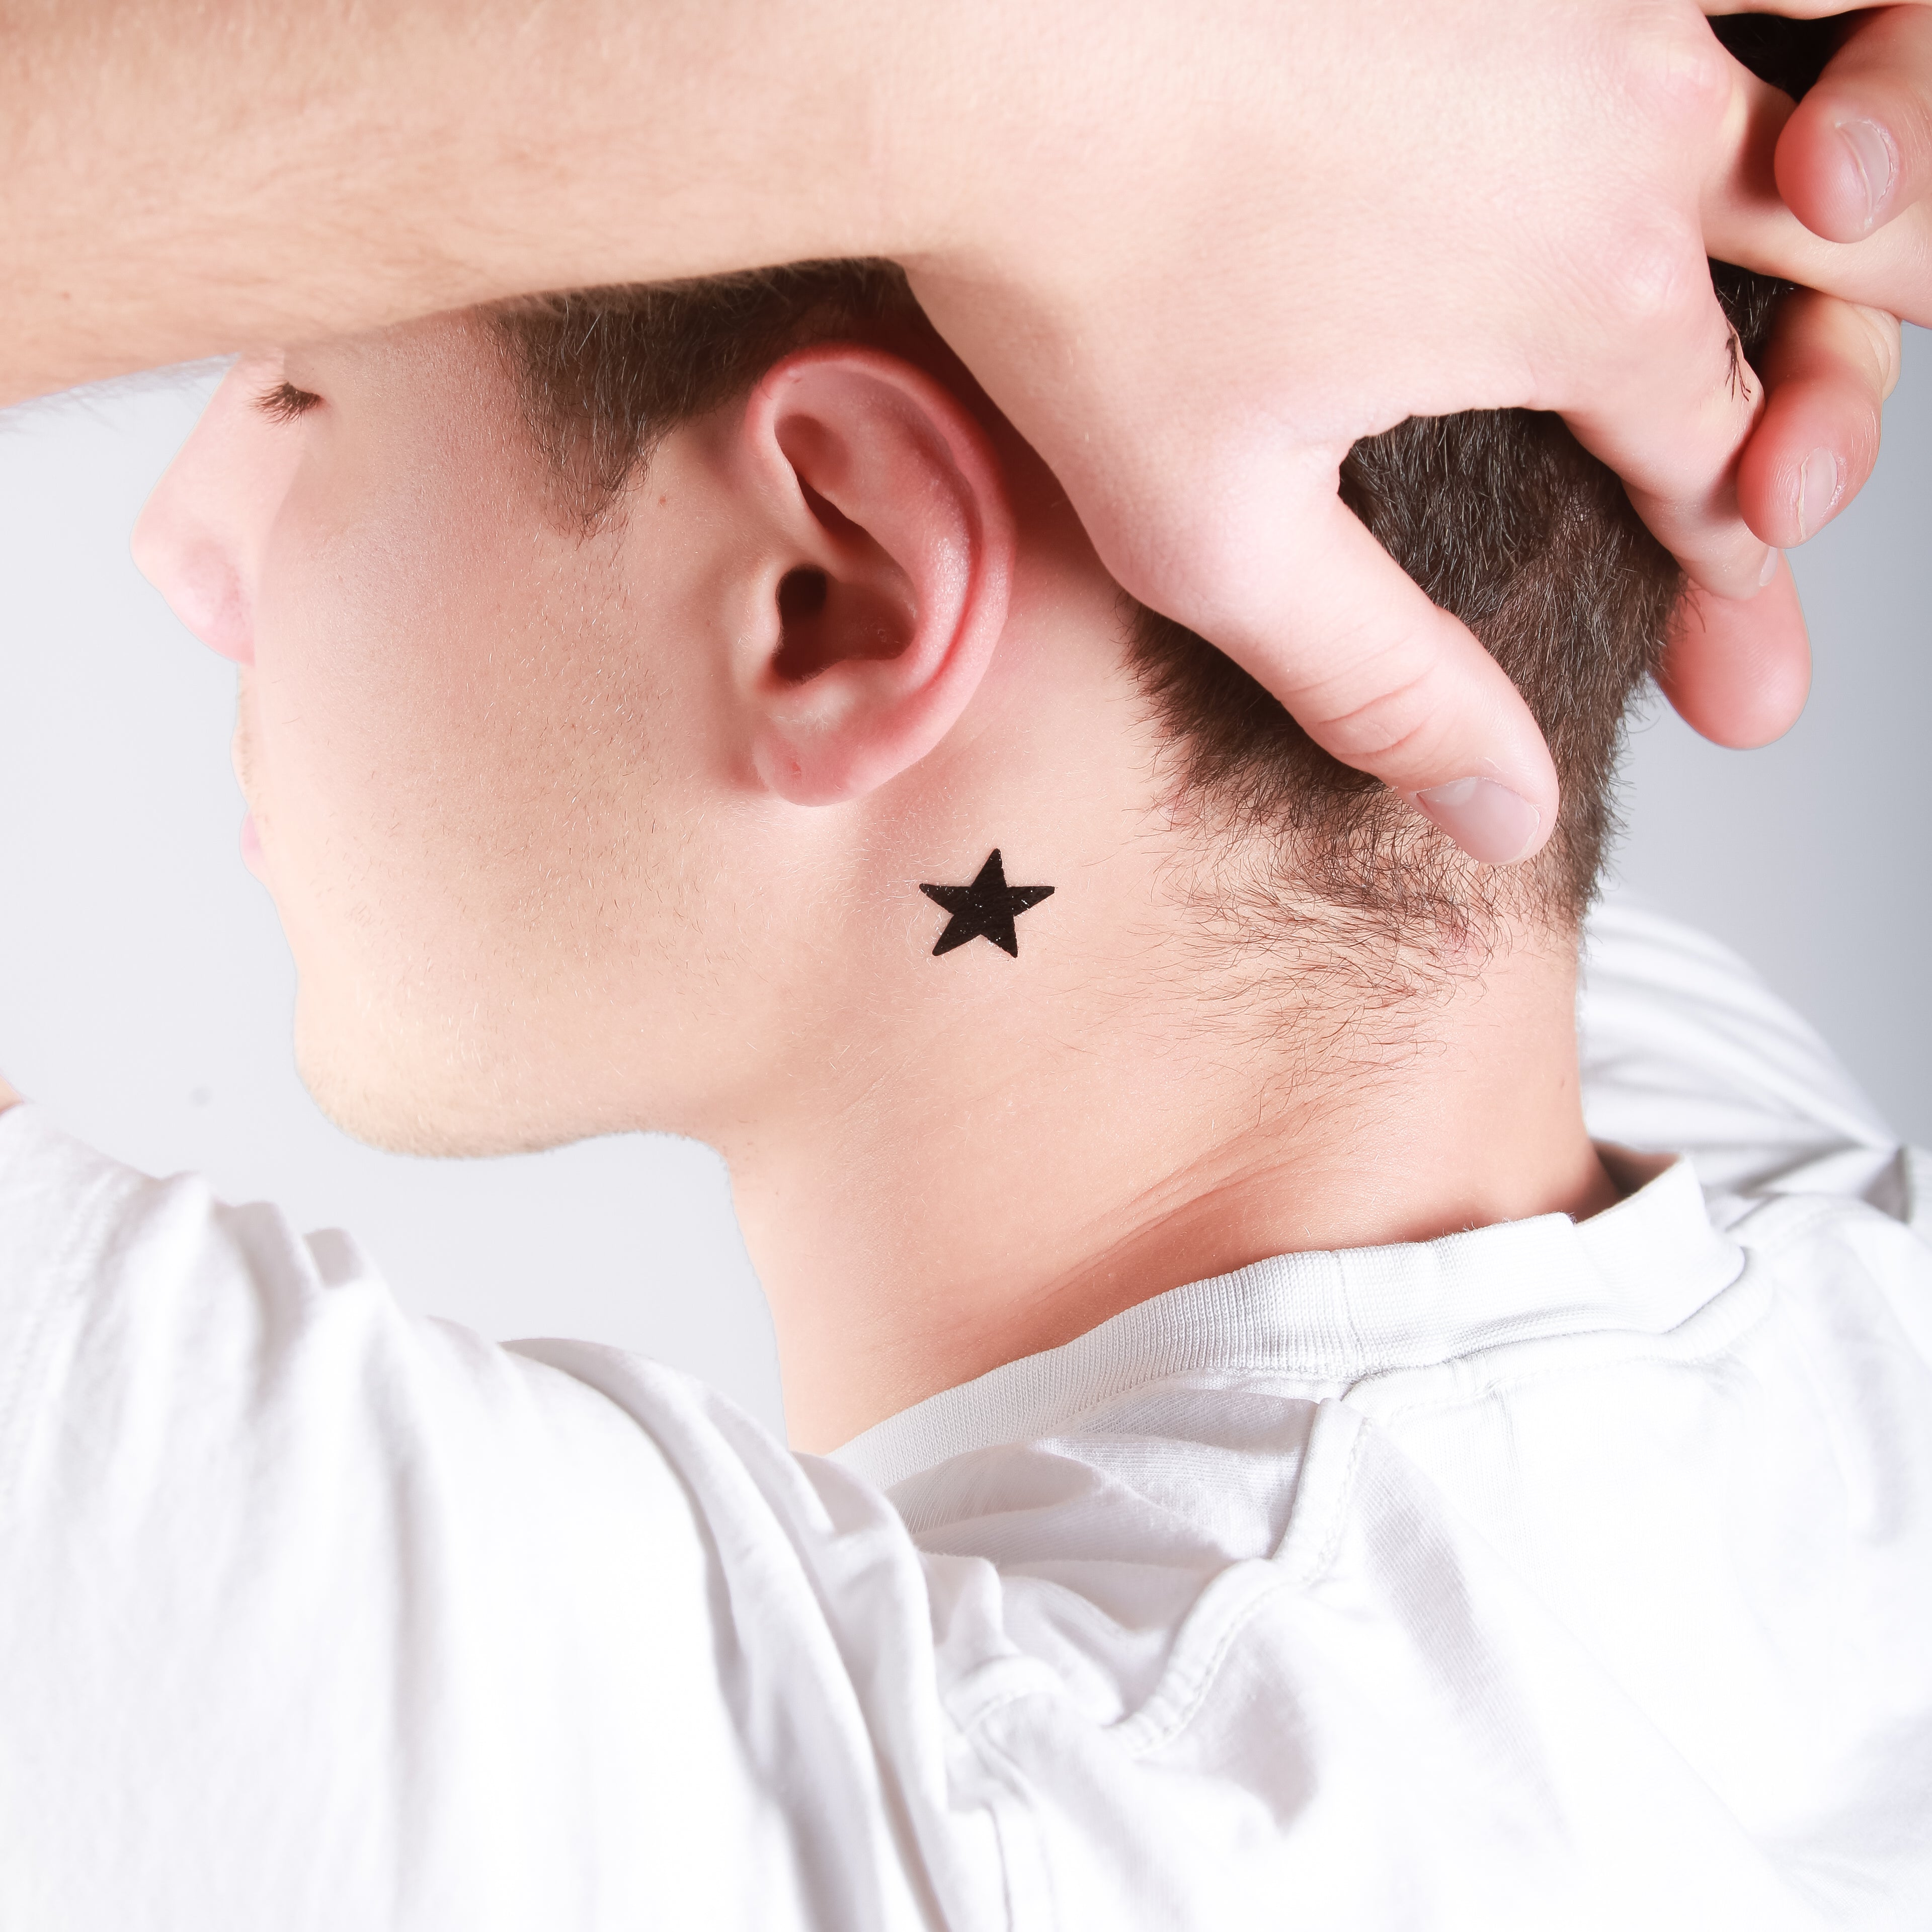 14 Behind the Ear Tattoo Ideas That Are Creative and Cool